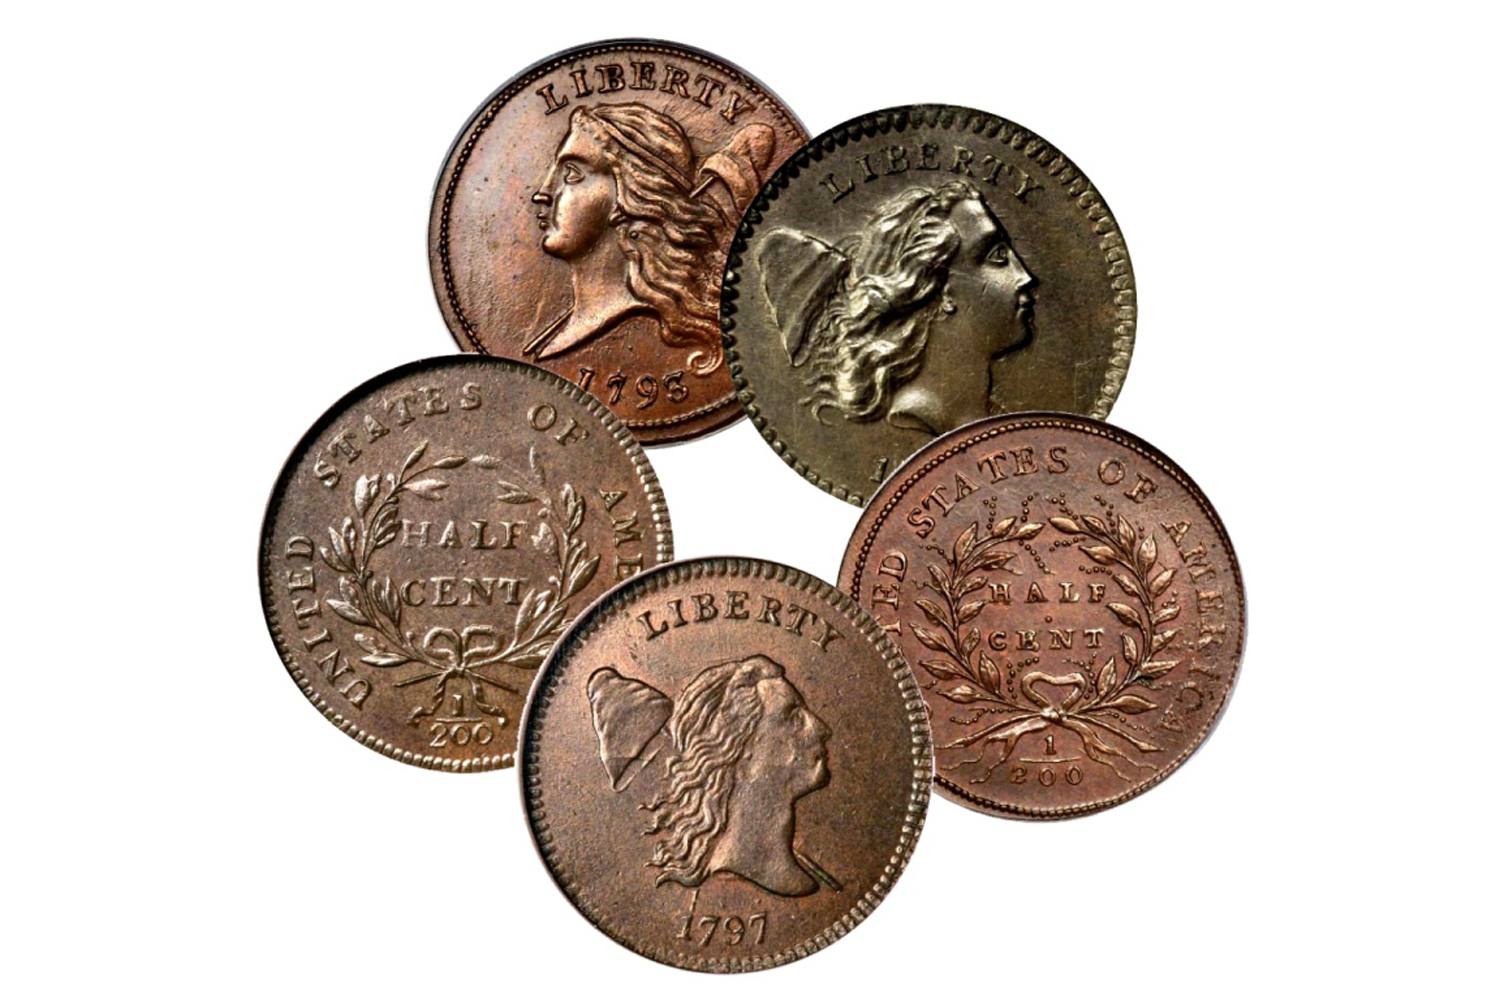 American Coins for sale - Buy American Coins | VCoins